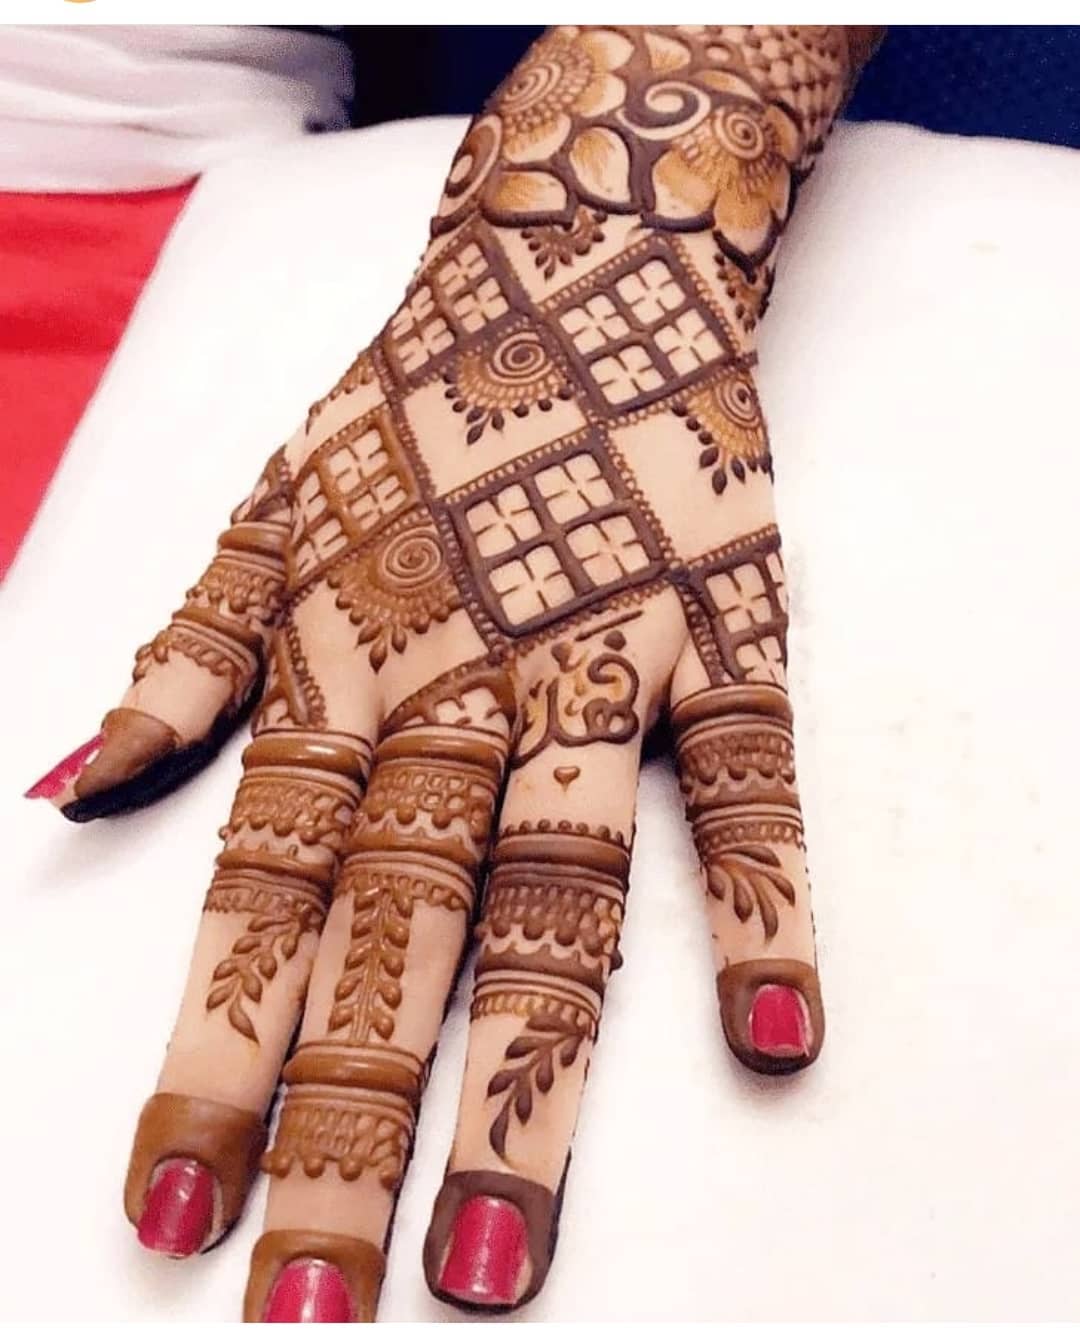 Simple and easy Arabic mehndi Designs for hands || Beginner friendly Mehndi  designs with Images | Mehndi designs for hands, Simple arabic mehndi designs,  Mehndi designs for fingers